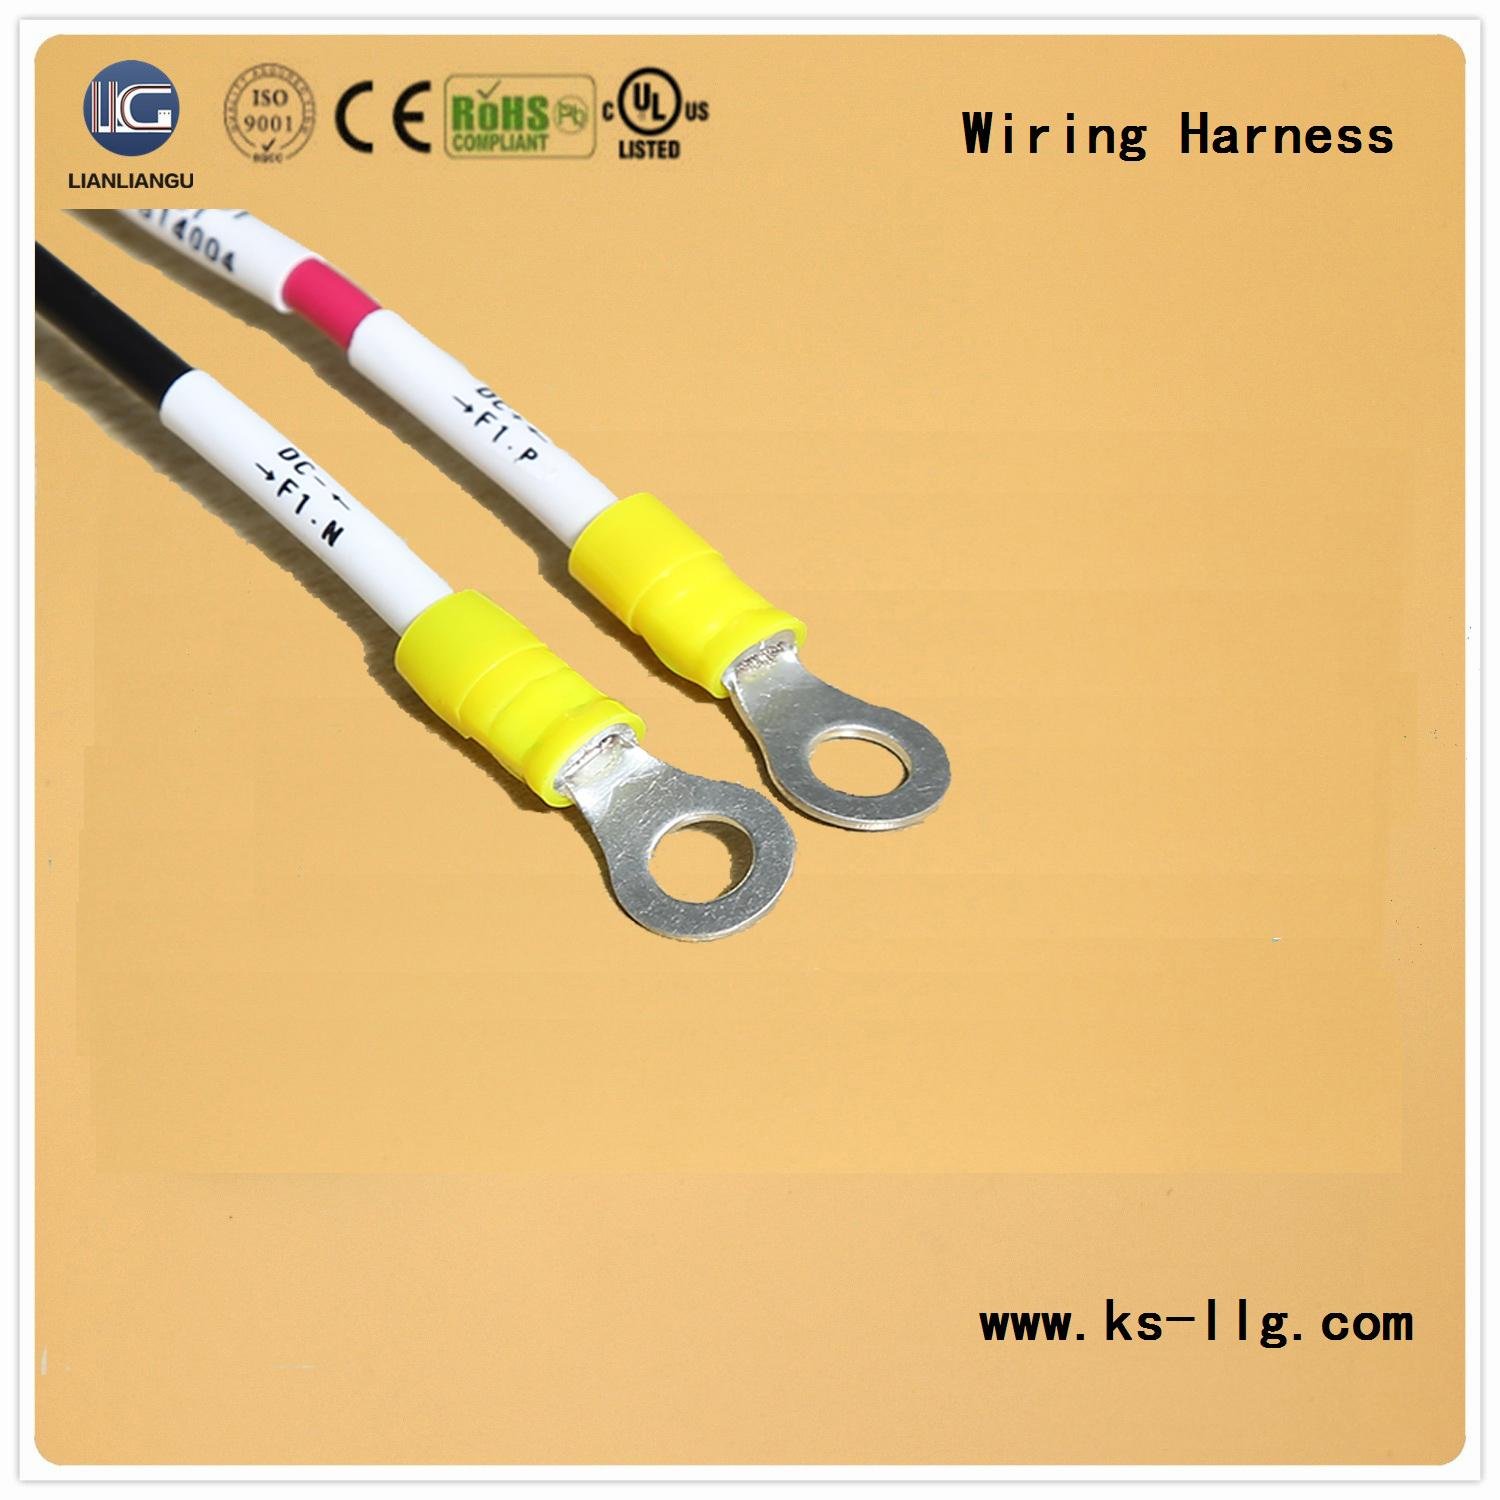 Coaxial Cable Wholesale Price for Network, Security Monitoring, Control Systems.